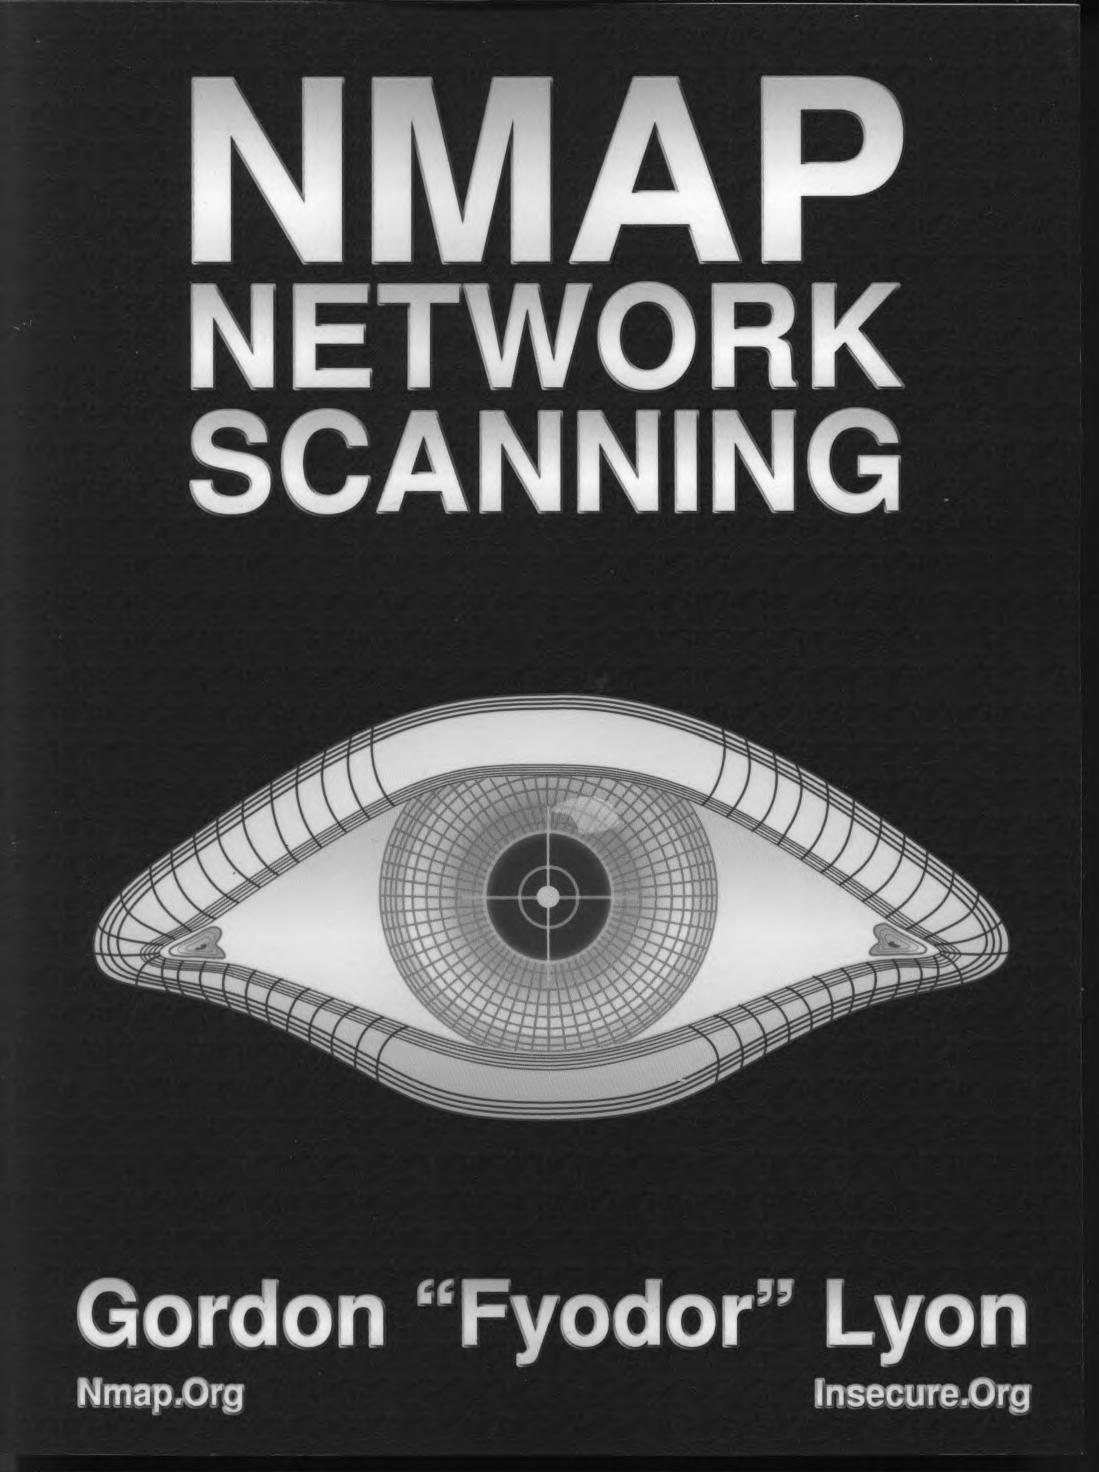 Nmap Network Scanning: Official Nmap Project Guide to Network Discovery and Security Scanning